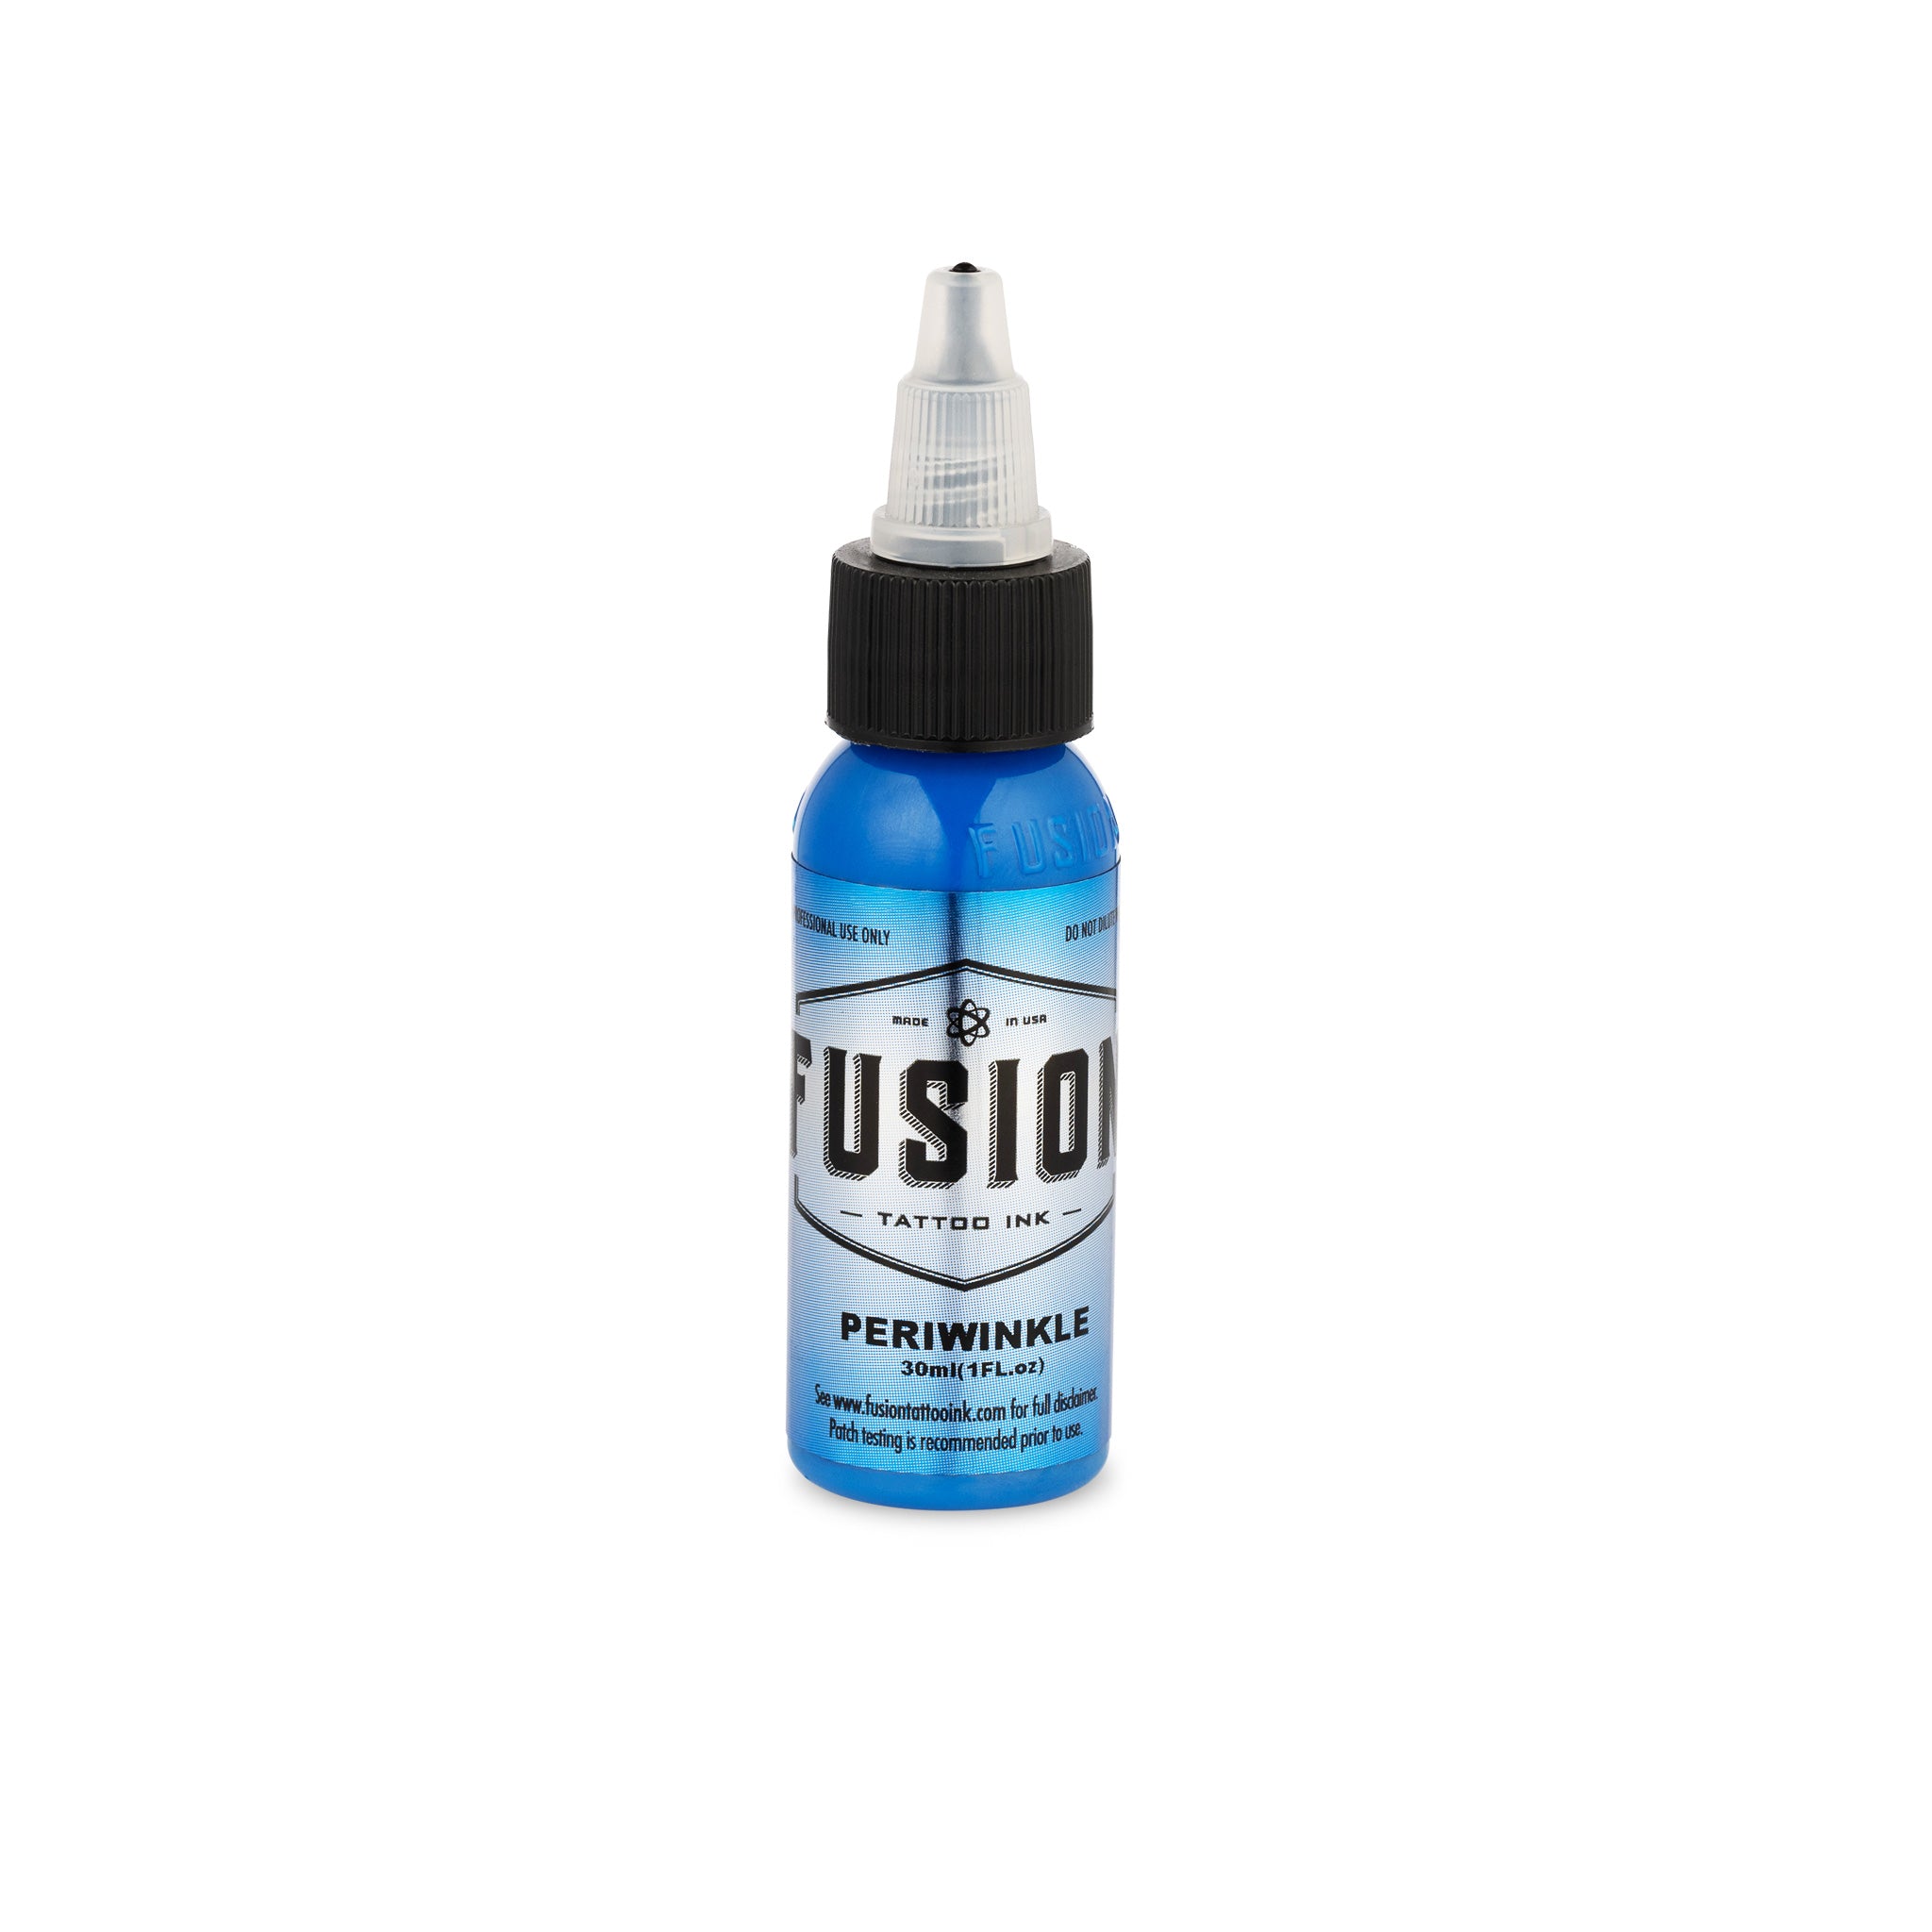 Fusion Periwinkle Tattoo Ink 1 oz.